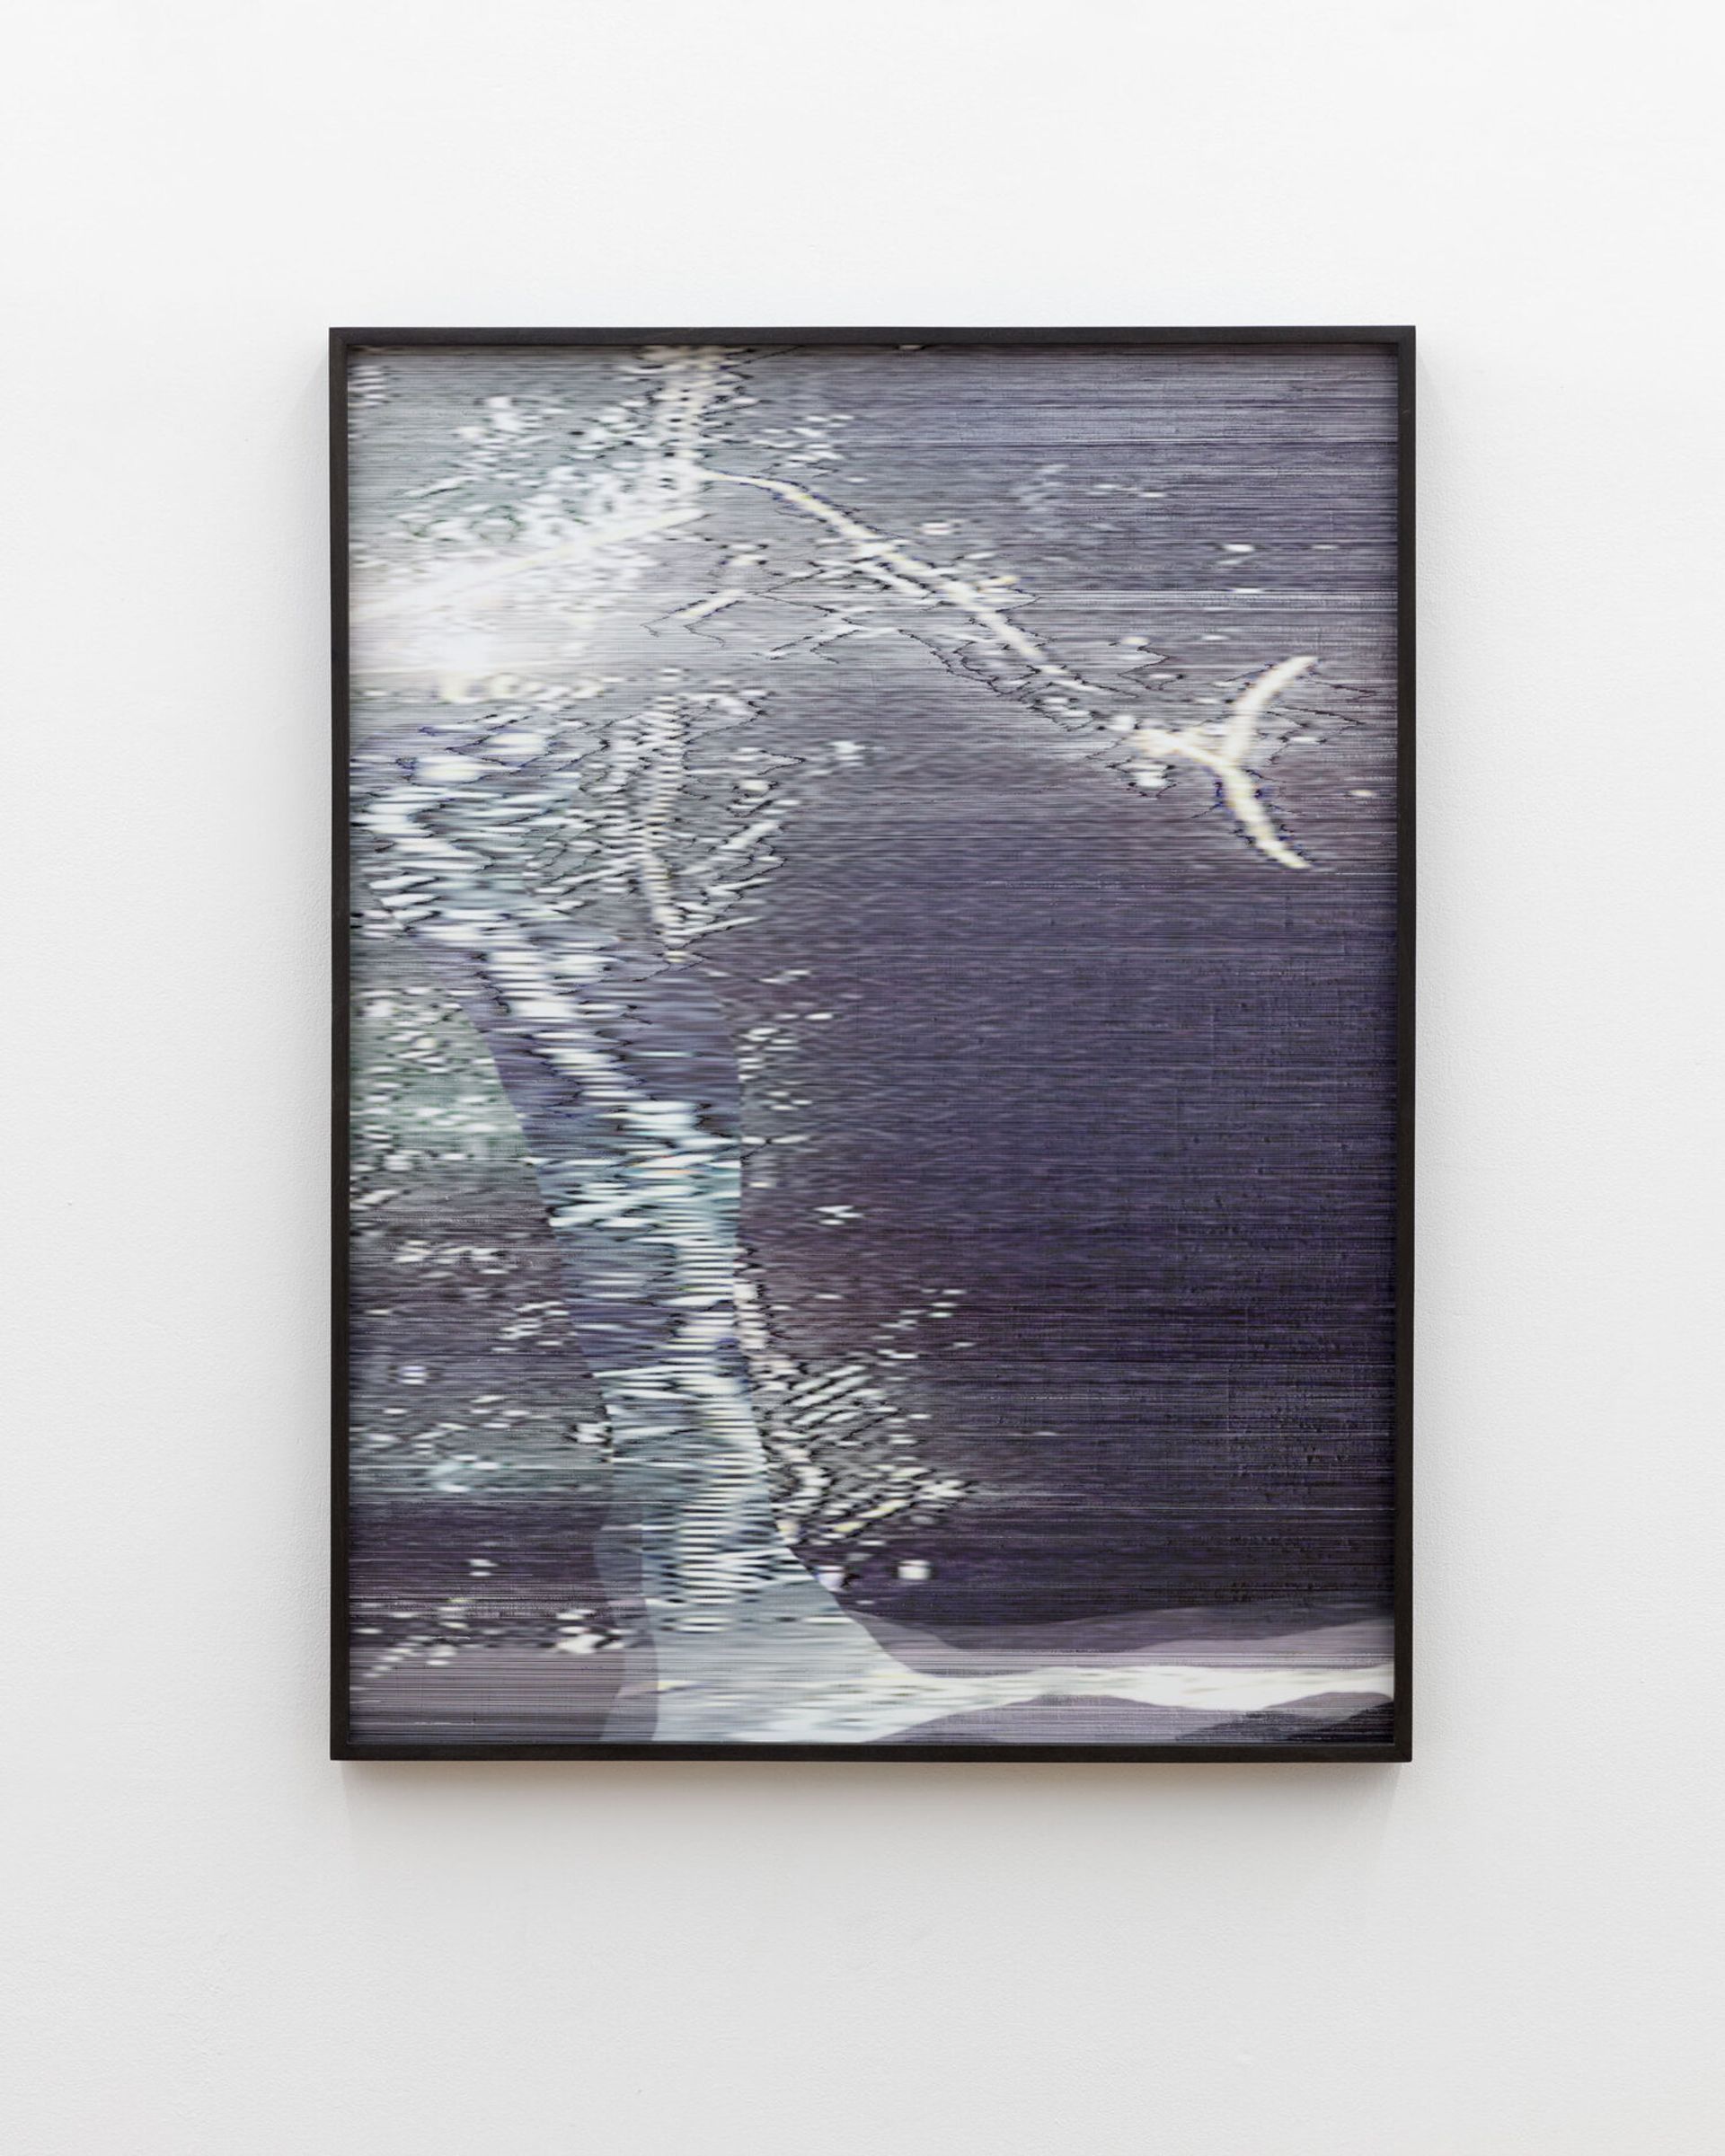 Anna Vogel, Electric Mountains II, 2019
pigment print, scratched, framed in lime, anthracite, artglass
80 × 60 cm, unique

Photo: Sebastian Kissel